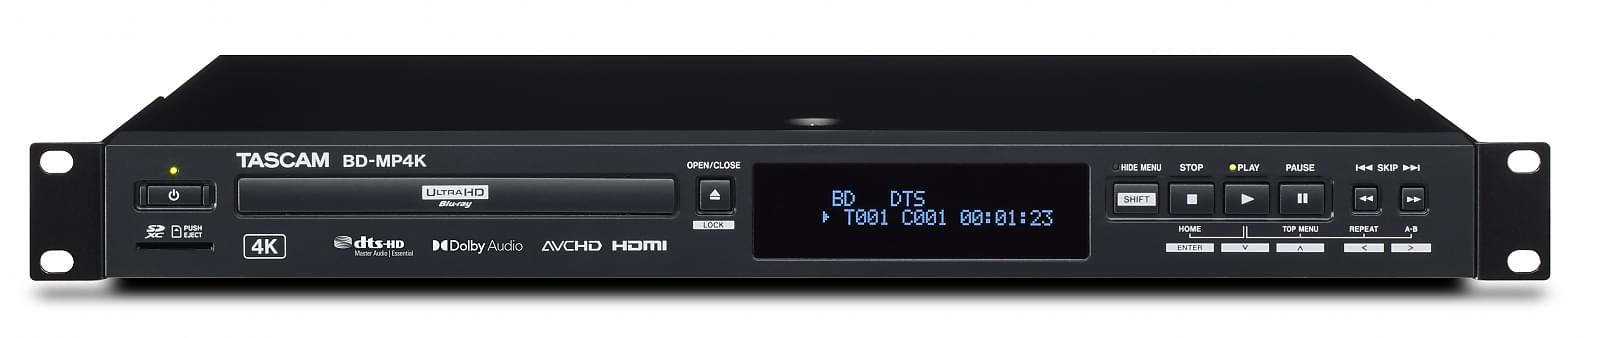 Professional 4K/UHD Blu-Ray/Multi-Media Player for Touring and Installation | Tascam BD-MP4K